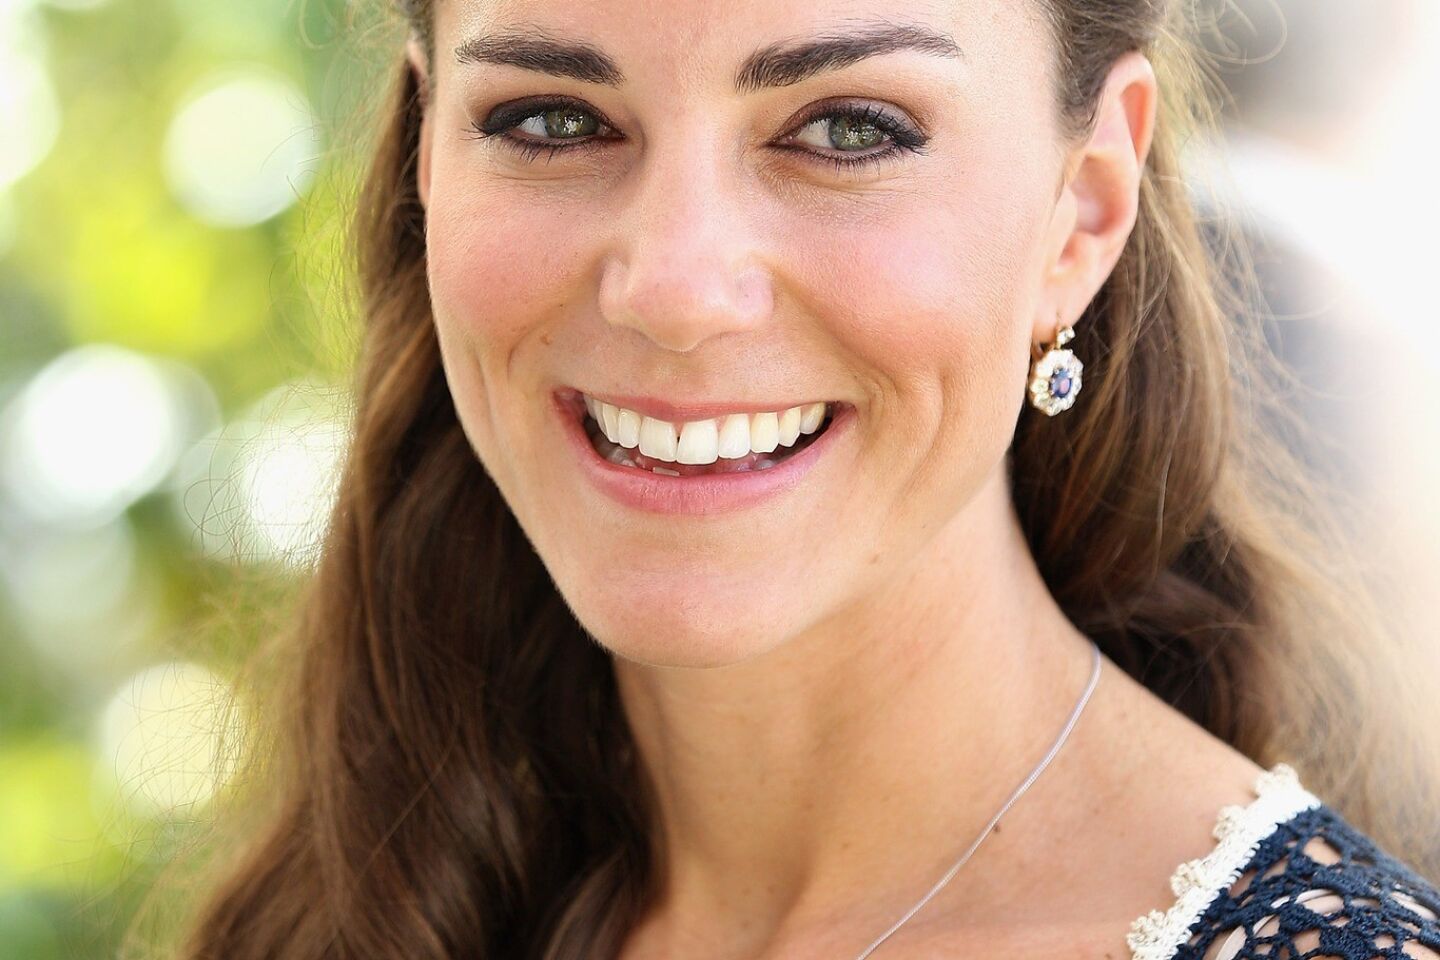 From Kate Middleton to Catherine, the Duchess of Cambridge